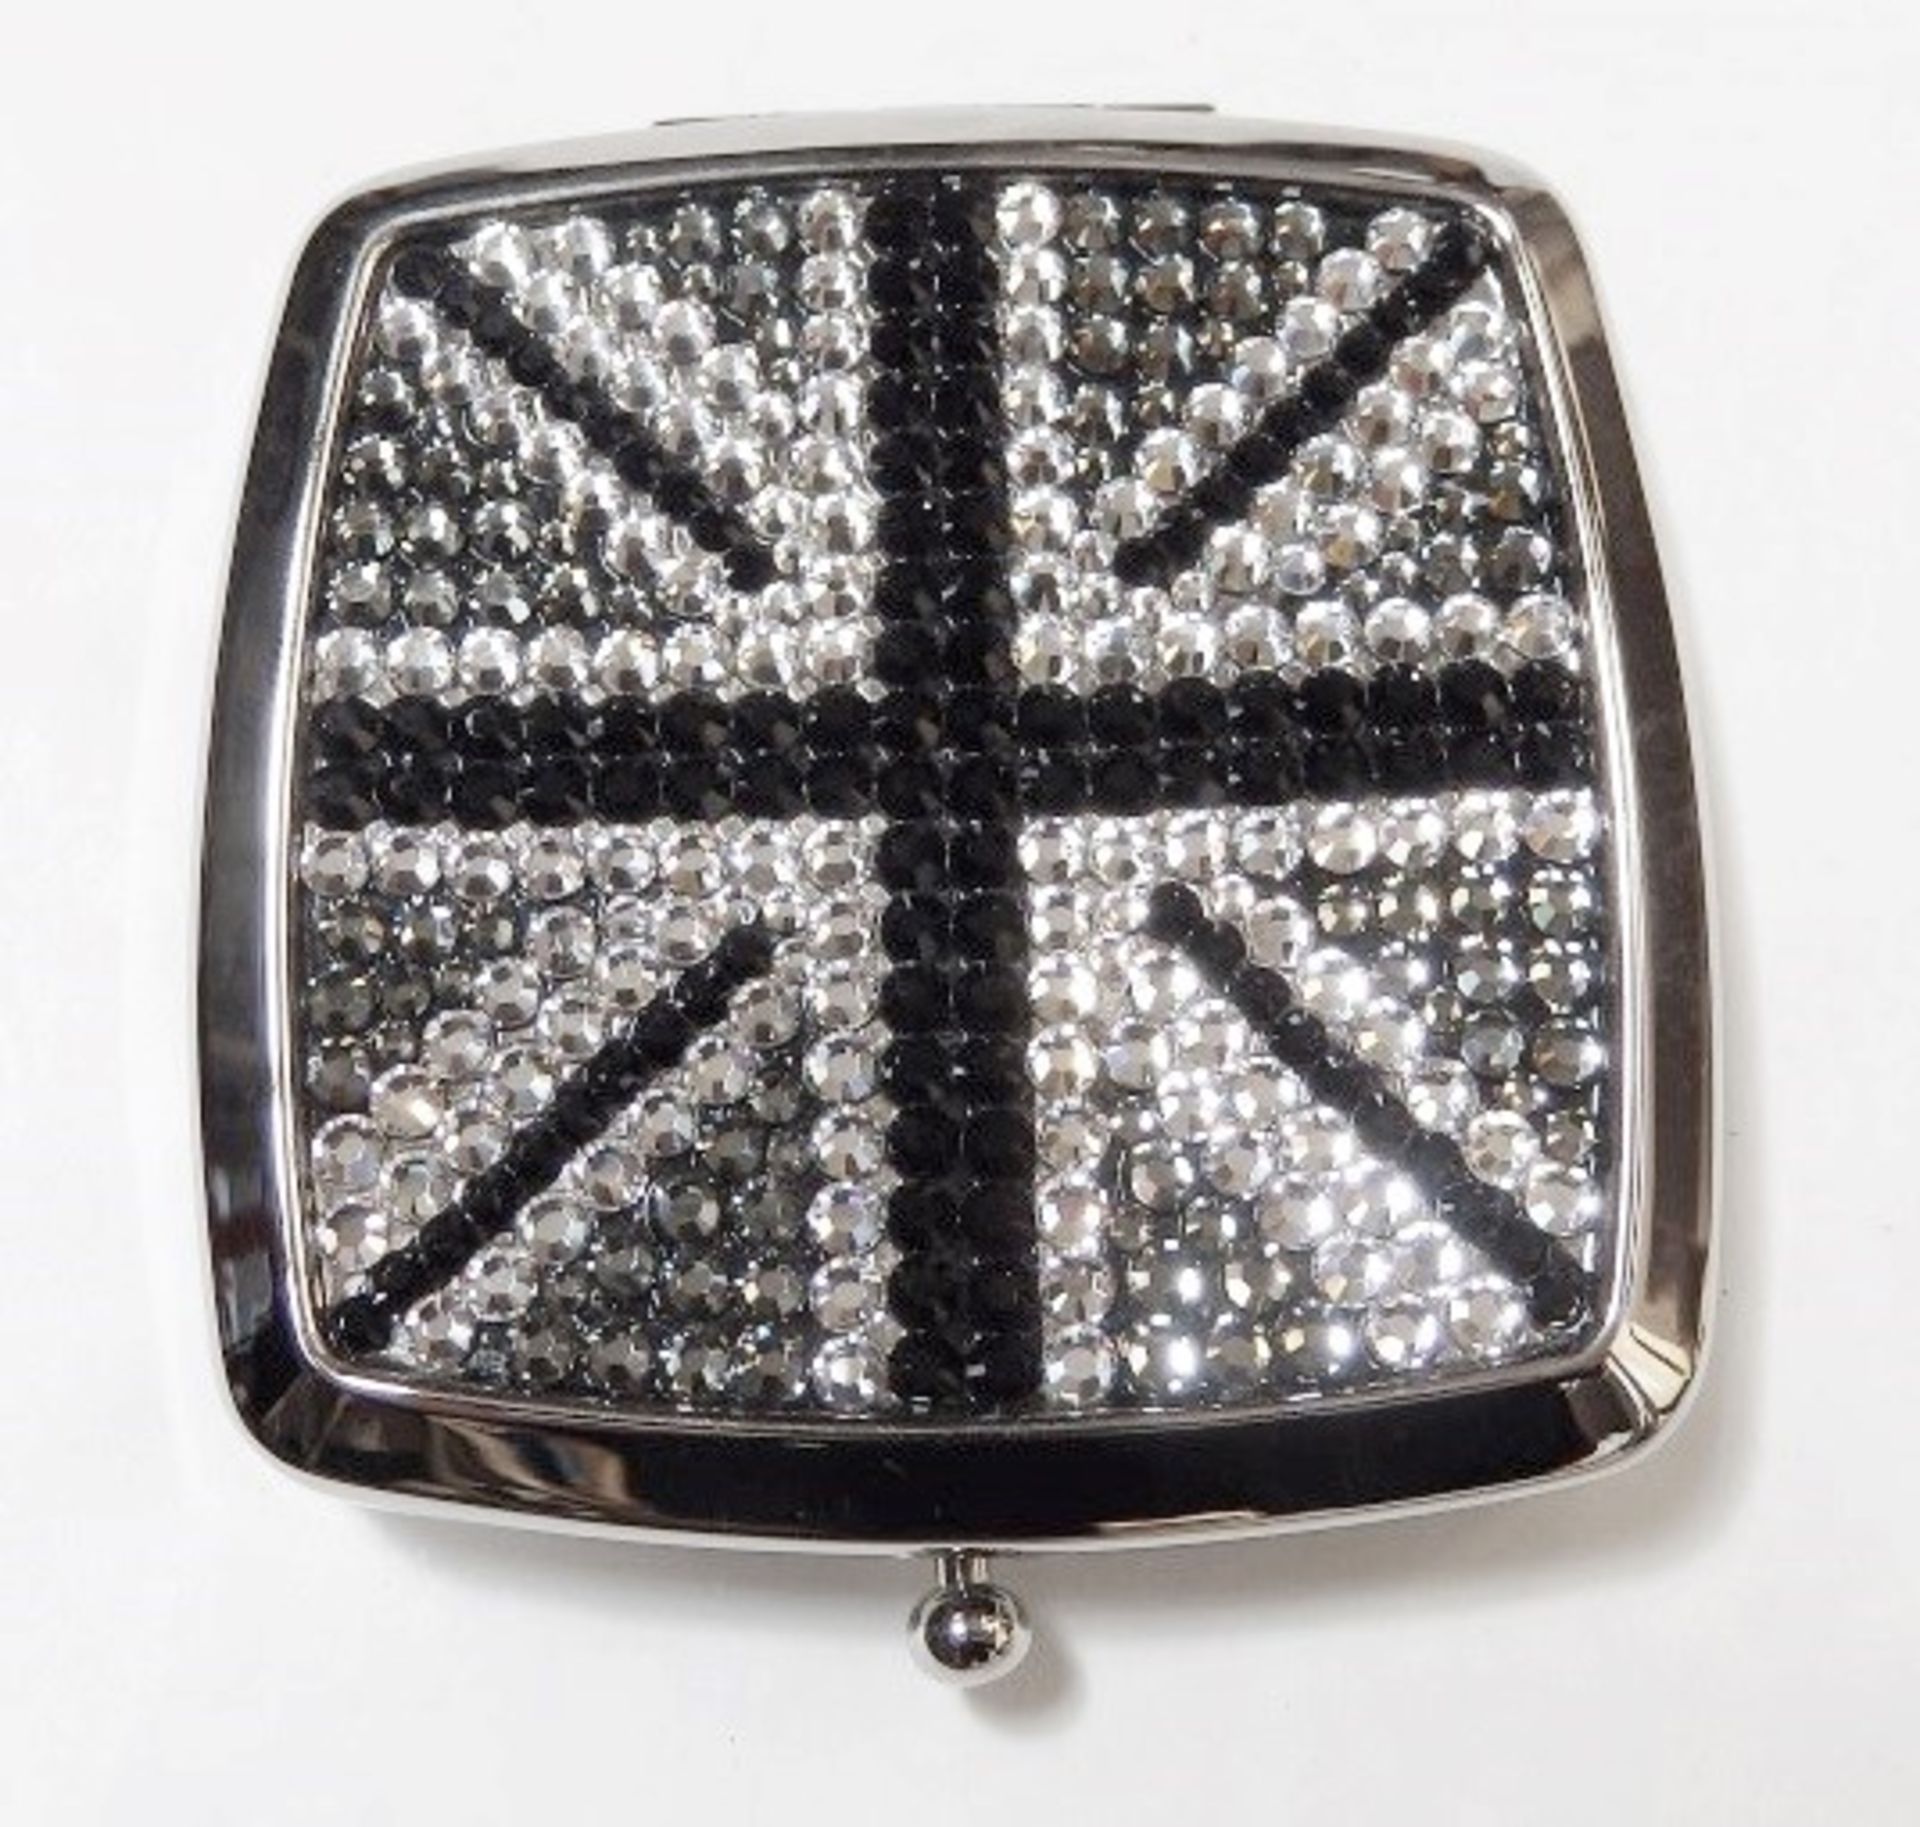 10 x ICE LONDON Black Union Jack Silver Plated Compact Mirrors - MADE WITH "SWAROVSKI¨ ELEMENTS - - Image 5 of 5